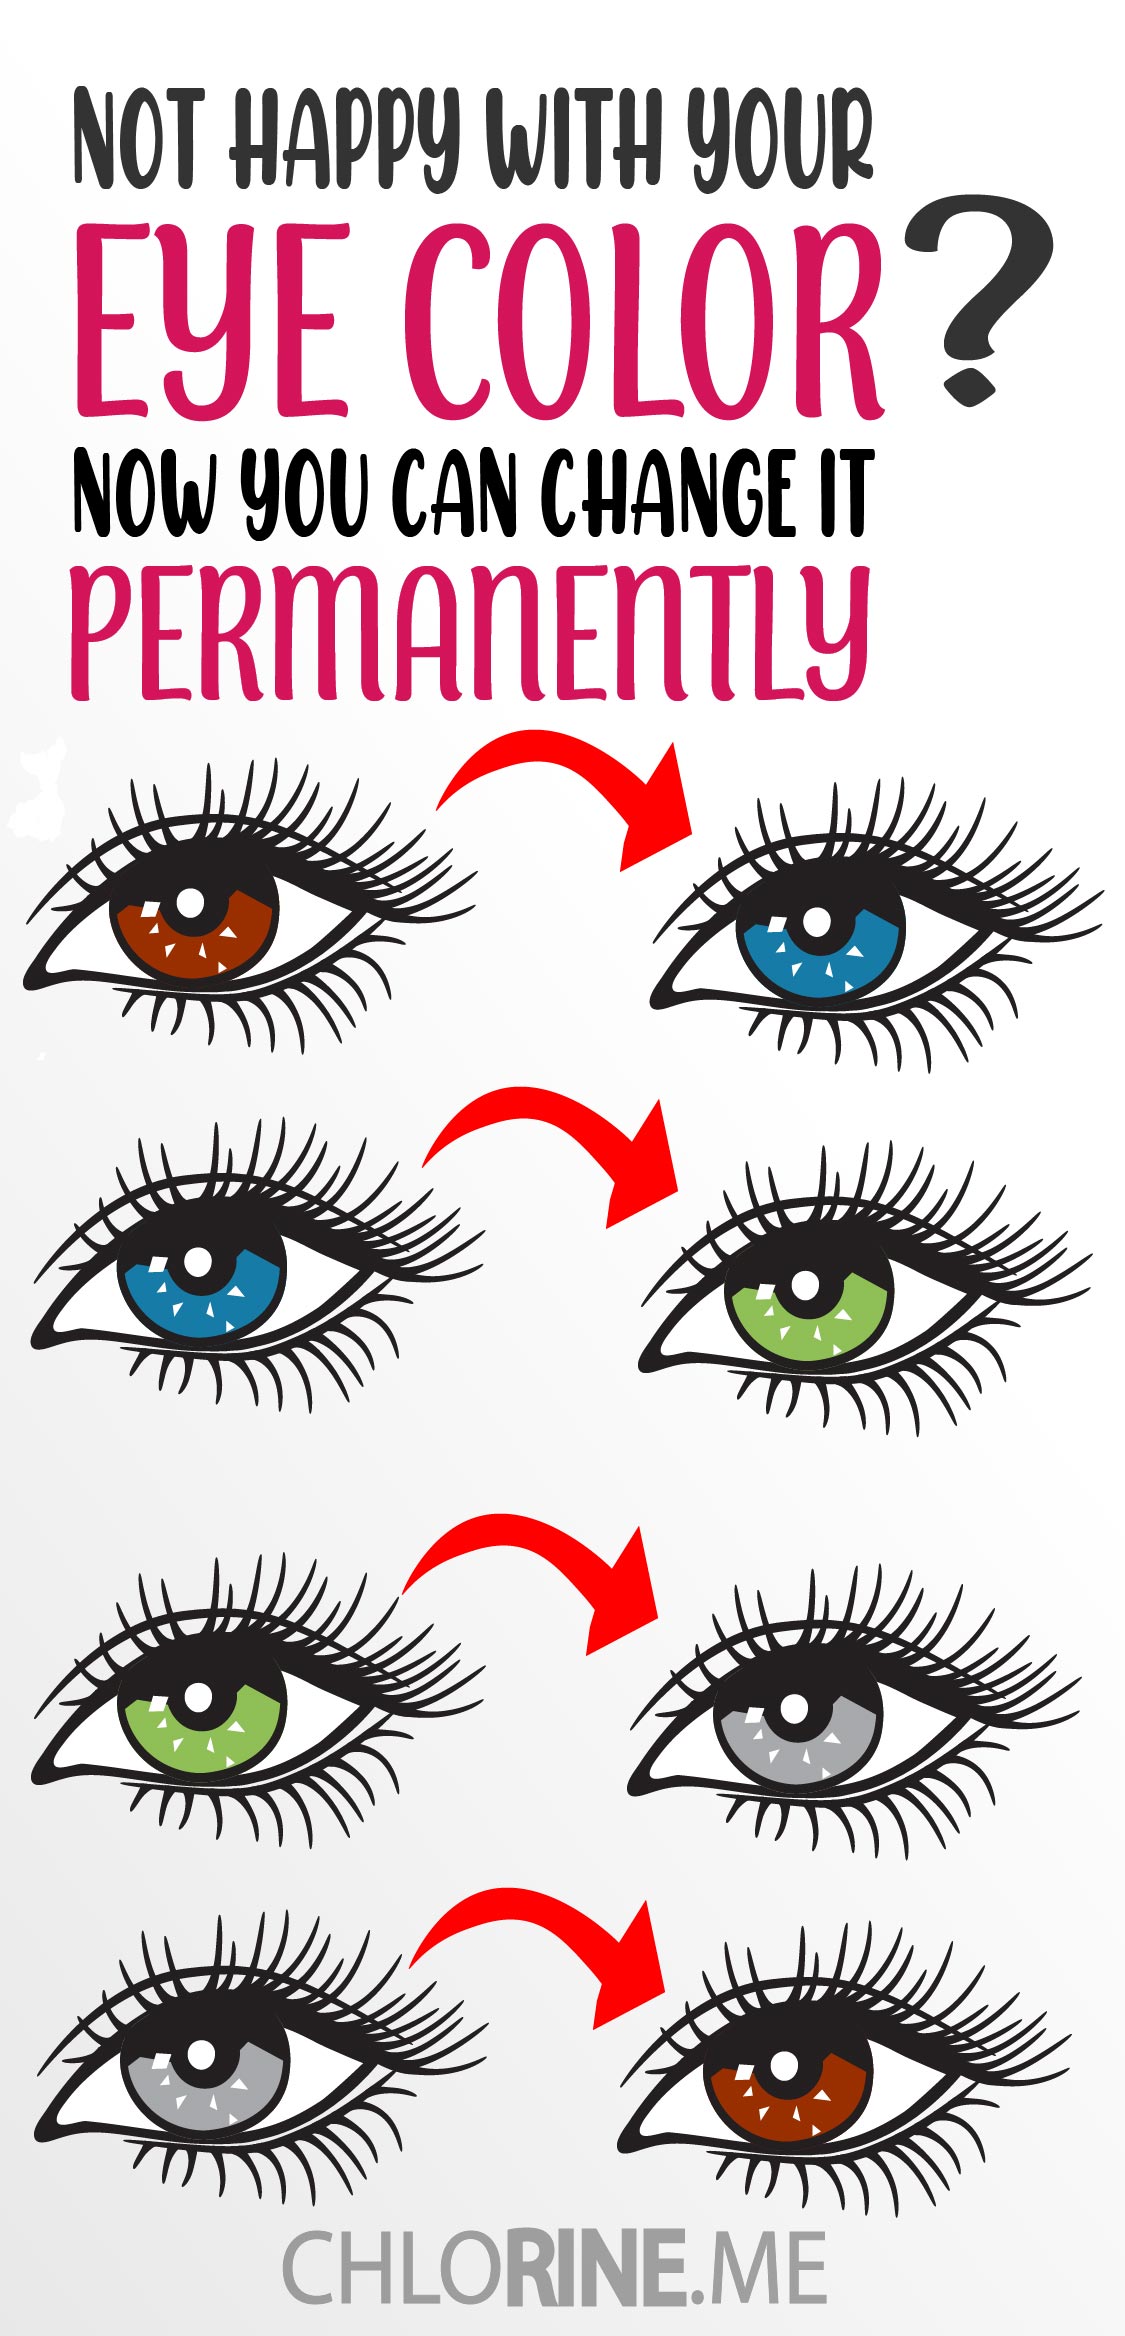 HOW TO CHANGE EYE COLOR PERMENANTLY